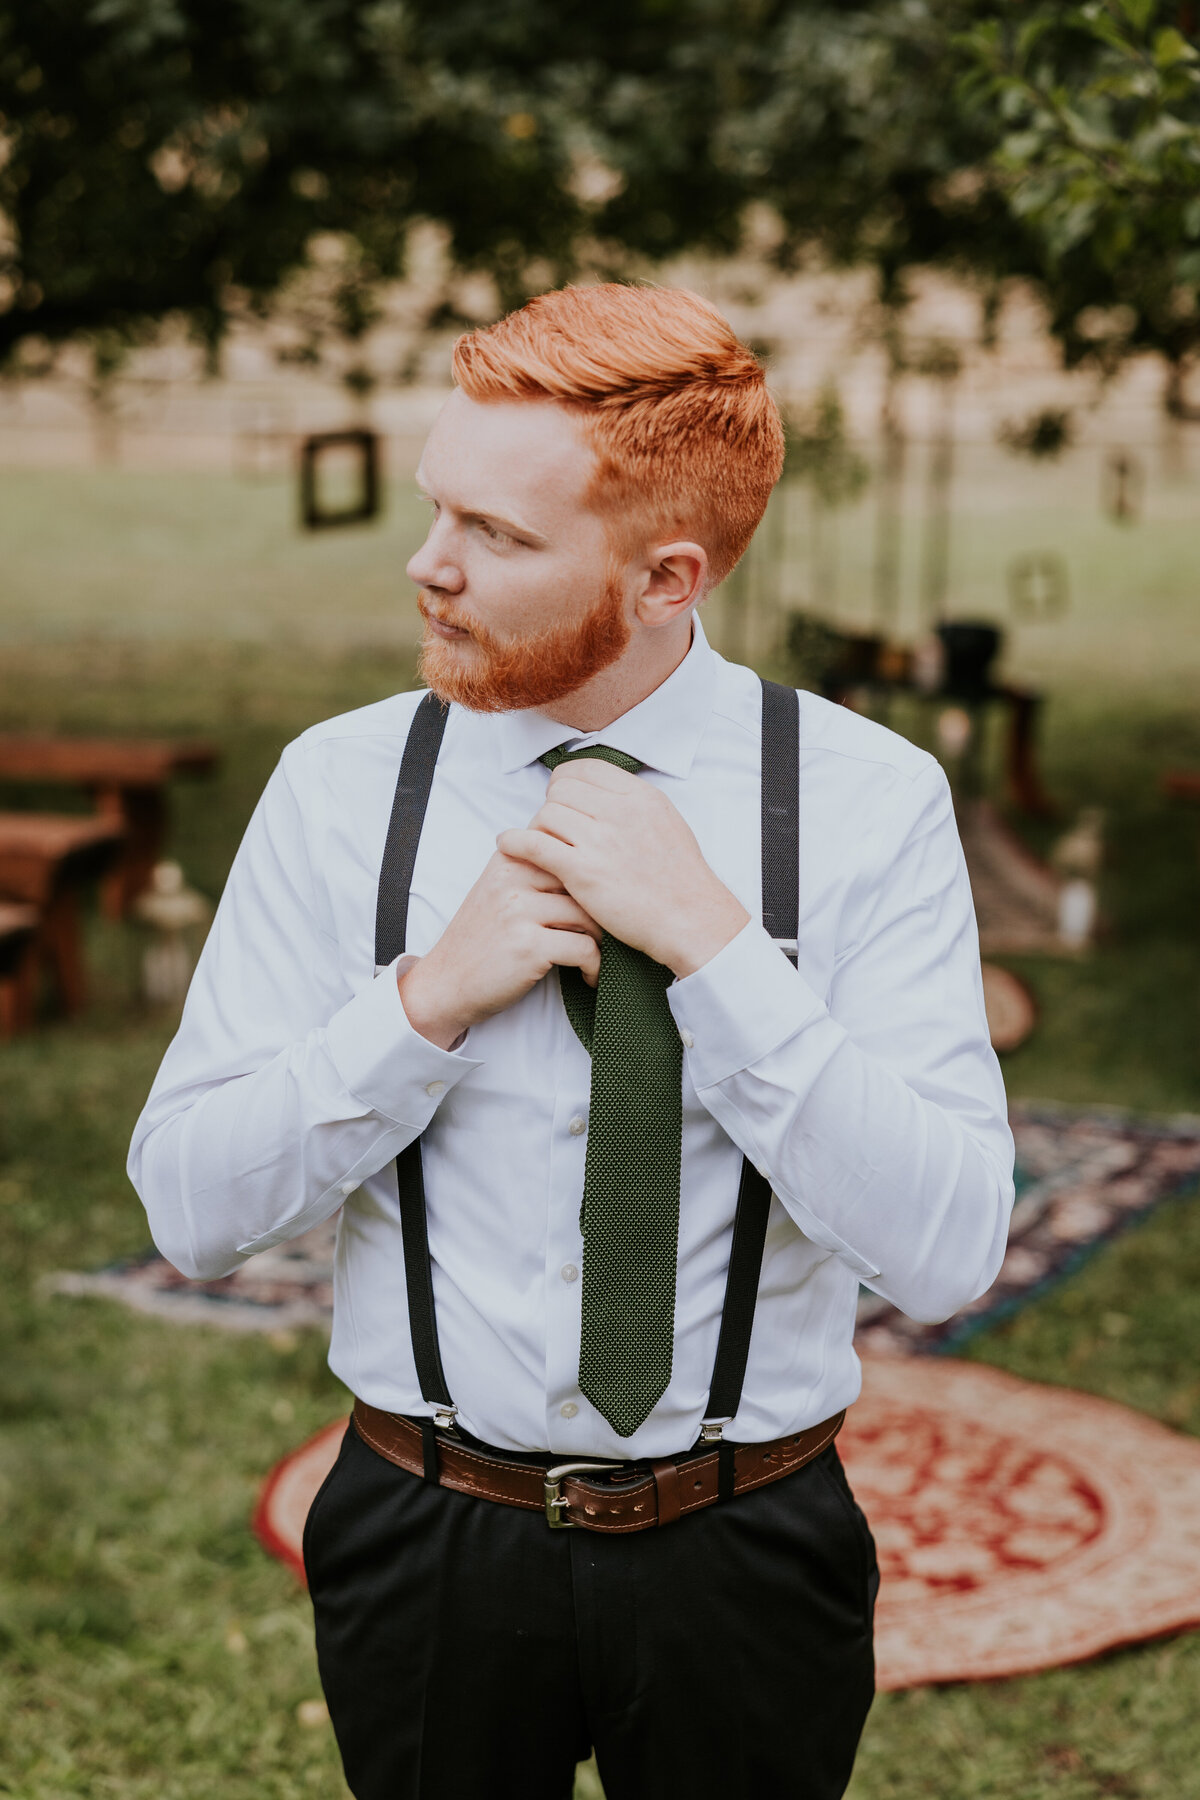 Groom adjusts tie while looking to the right on the camera frame.